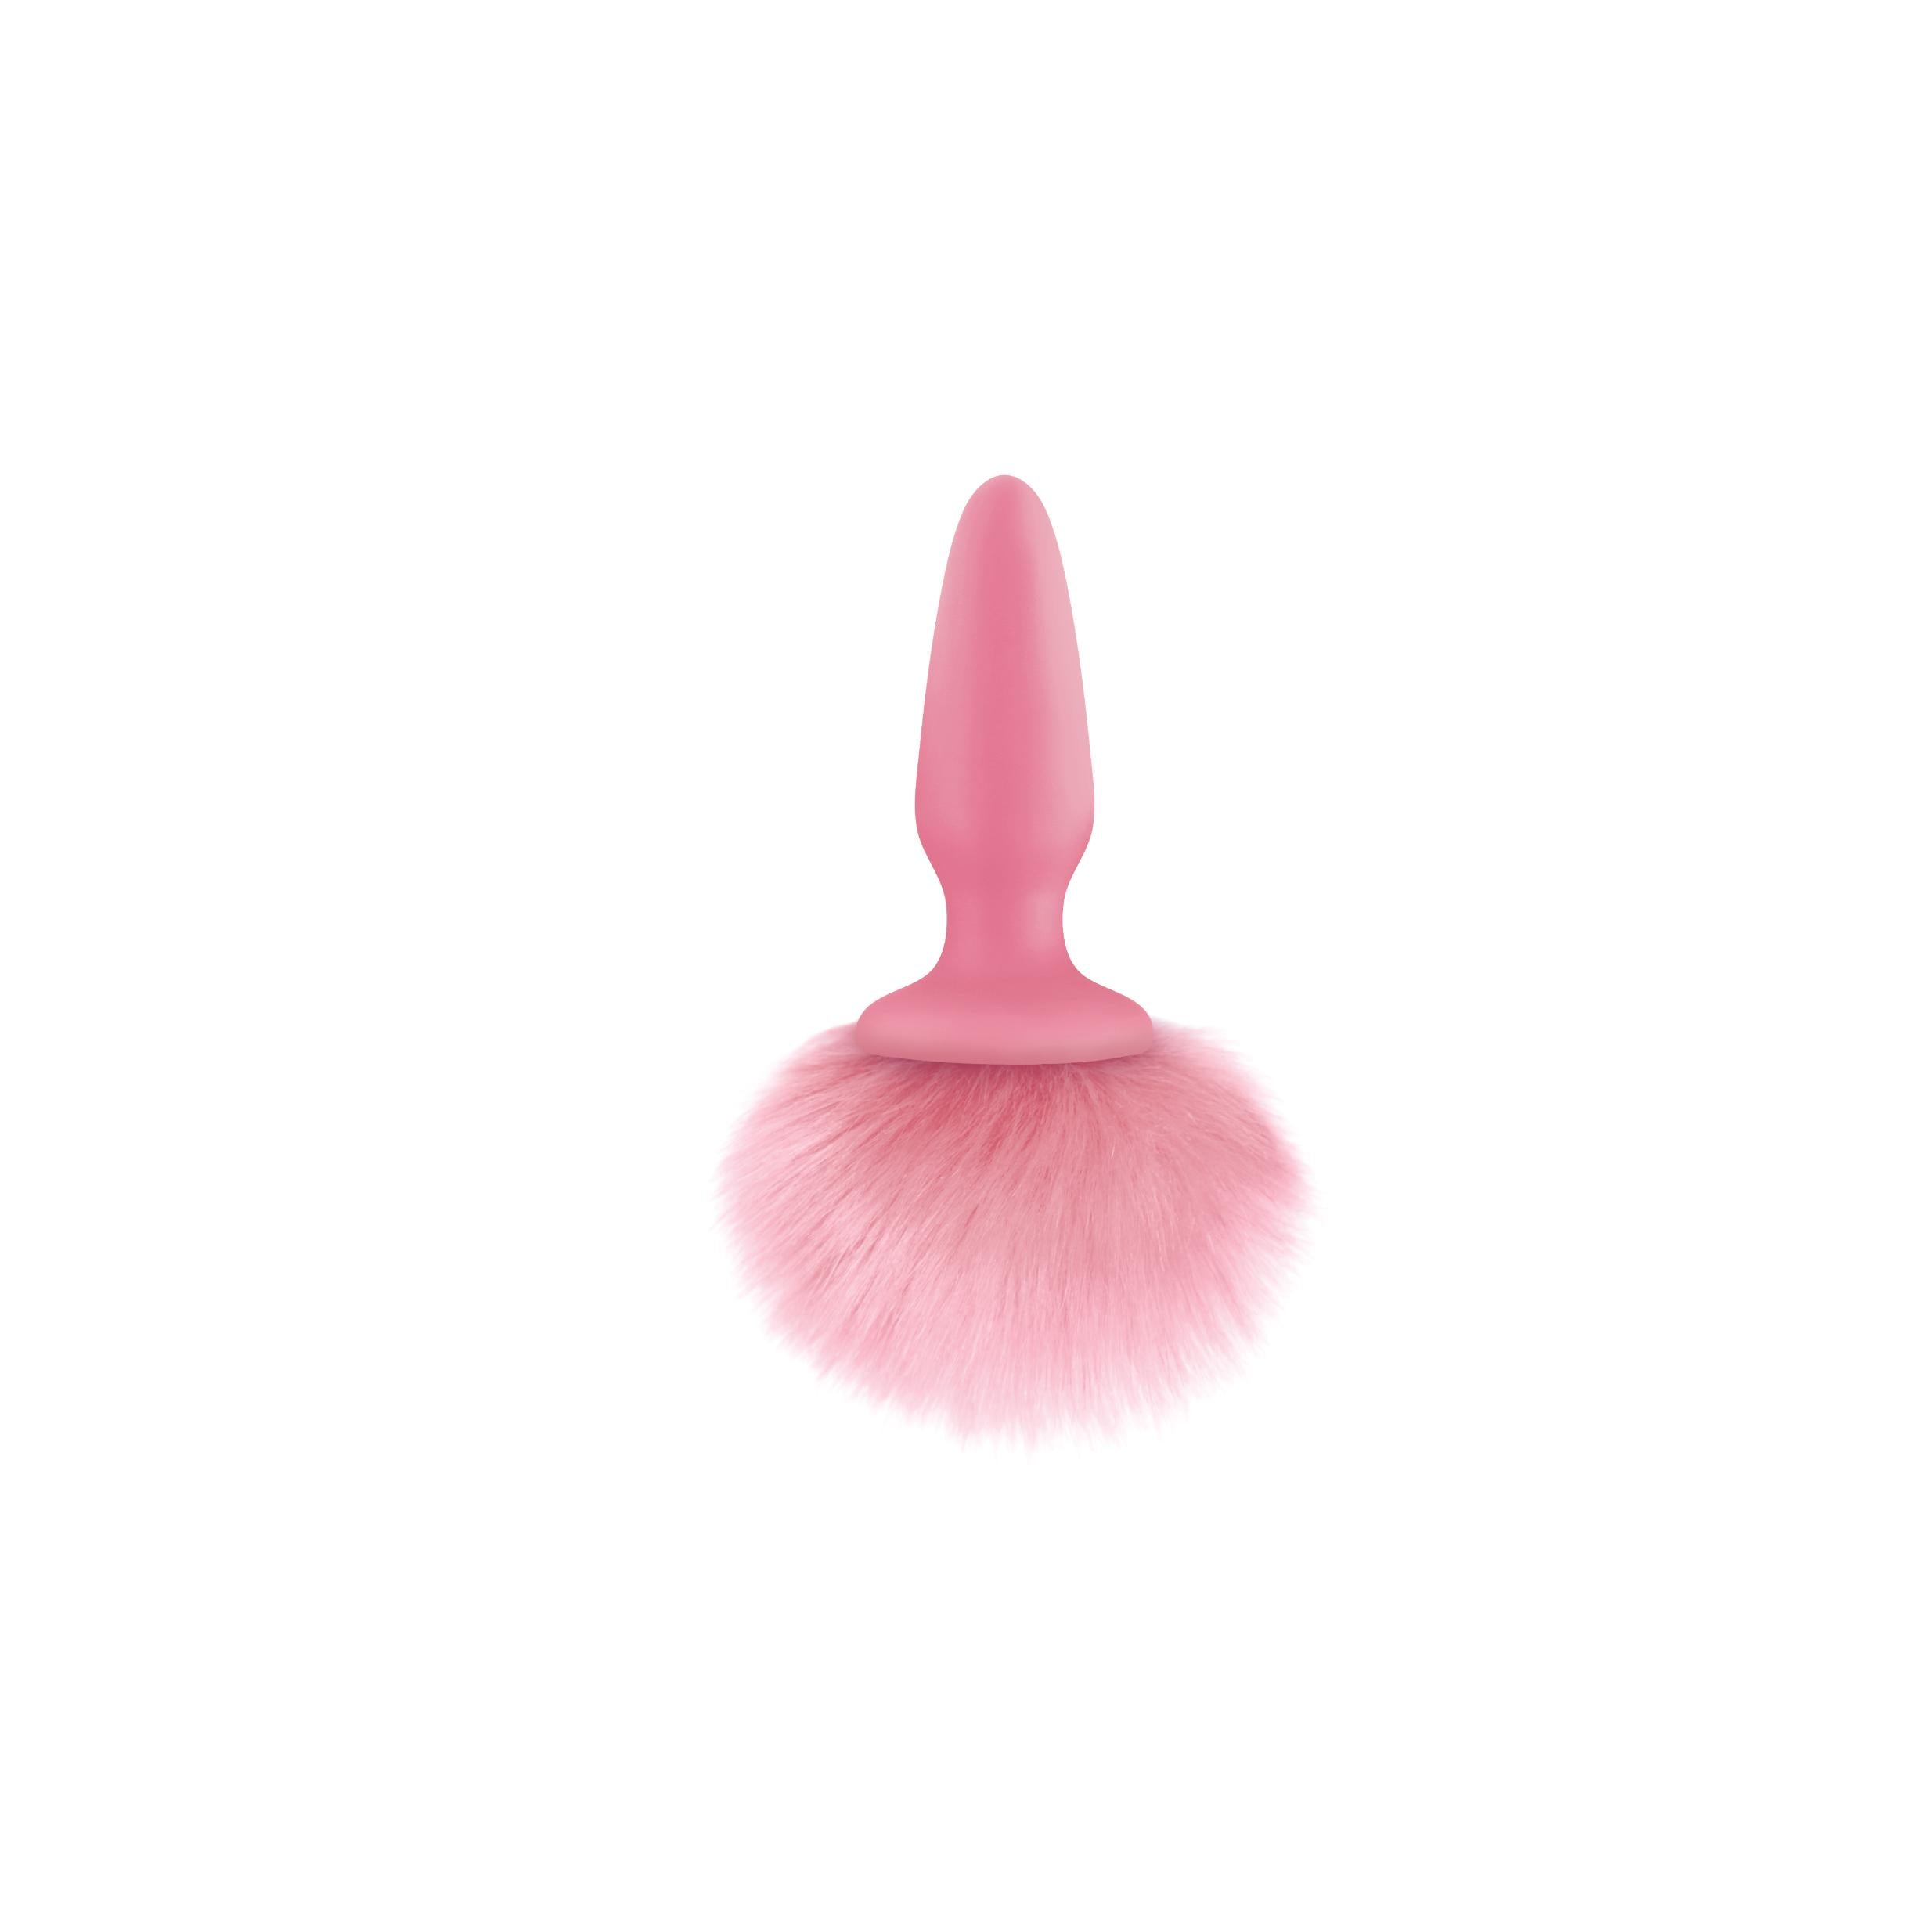 Nsnovelties' Bunny Tails Role-Playing Anal Plug - Pink Pink